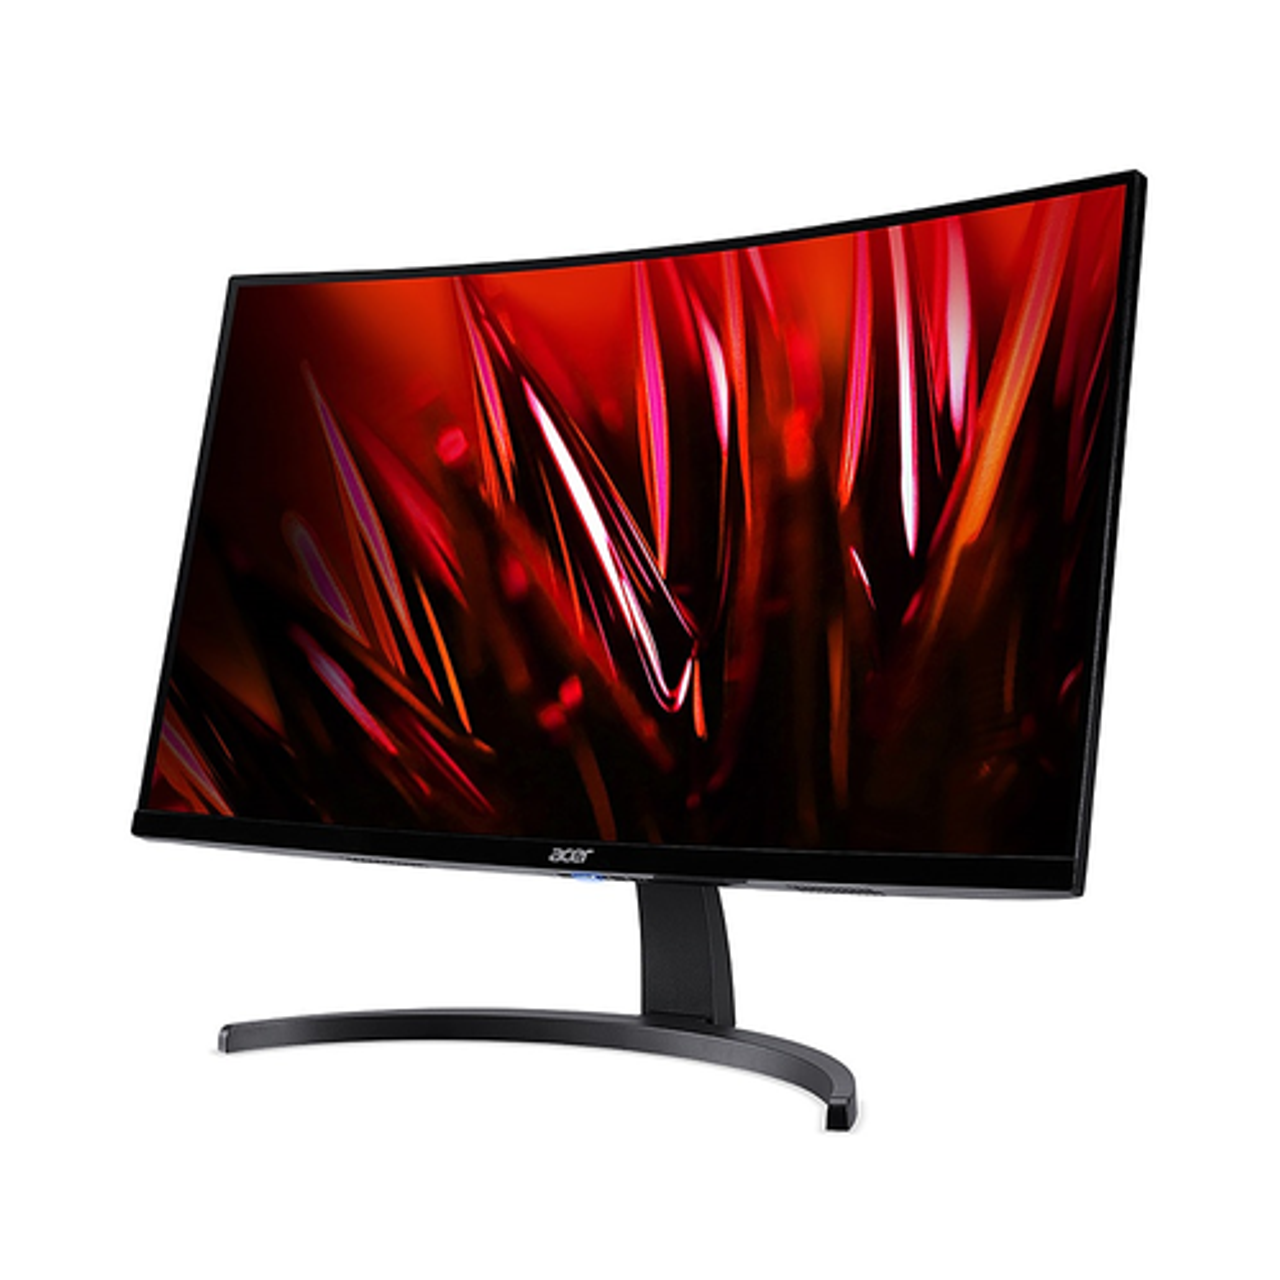 Acer - Nitro ED273 S3biip 27" FHD Curved Gaming Monitor with AMD FreeSync((1 x Display Port v1.4 & 2 x HDMI 2.0 Ports) - Black